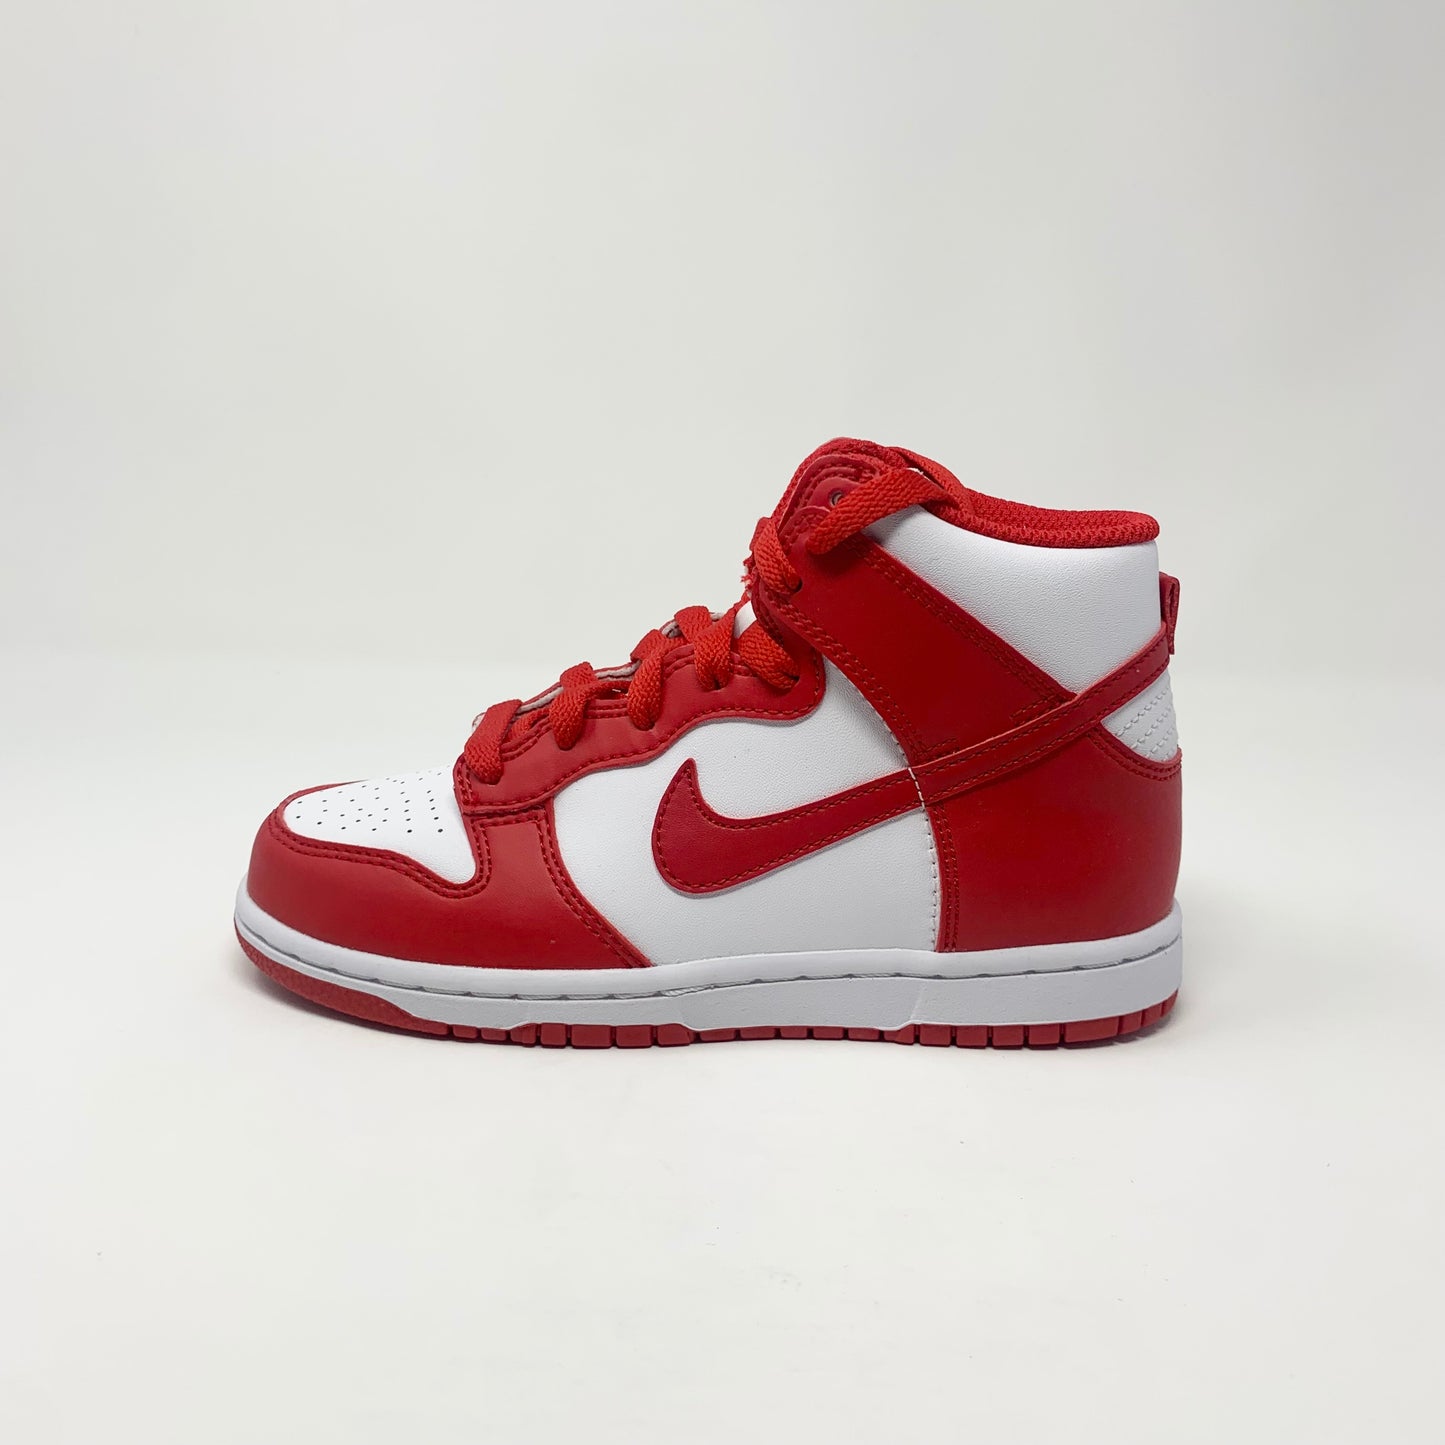 Nike Dunk High “Championship White Red” (PS)